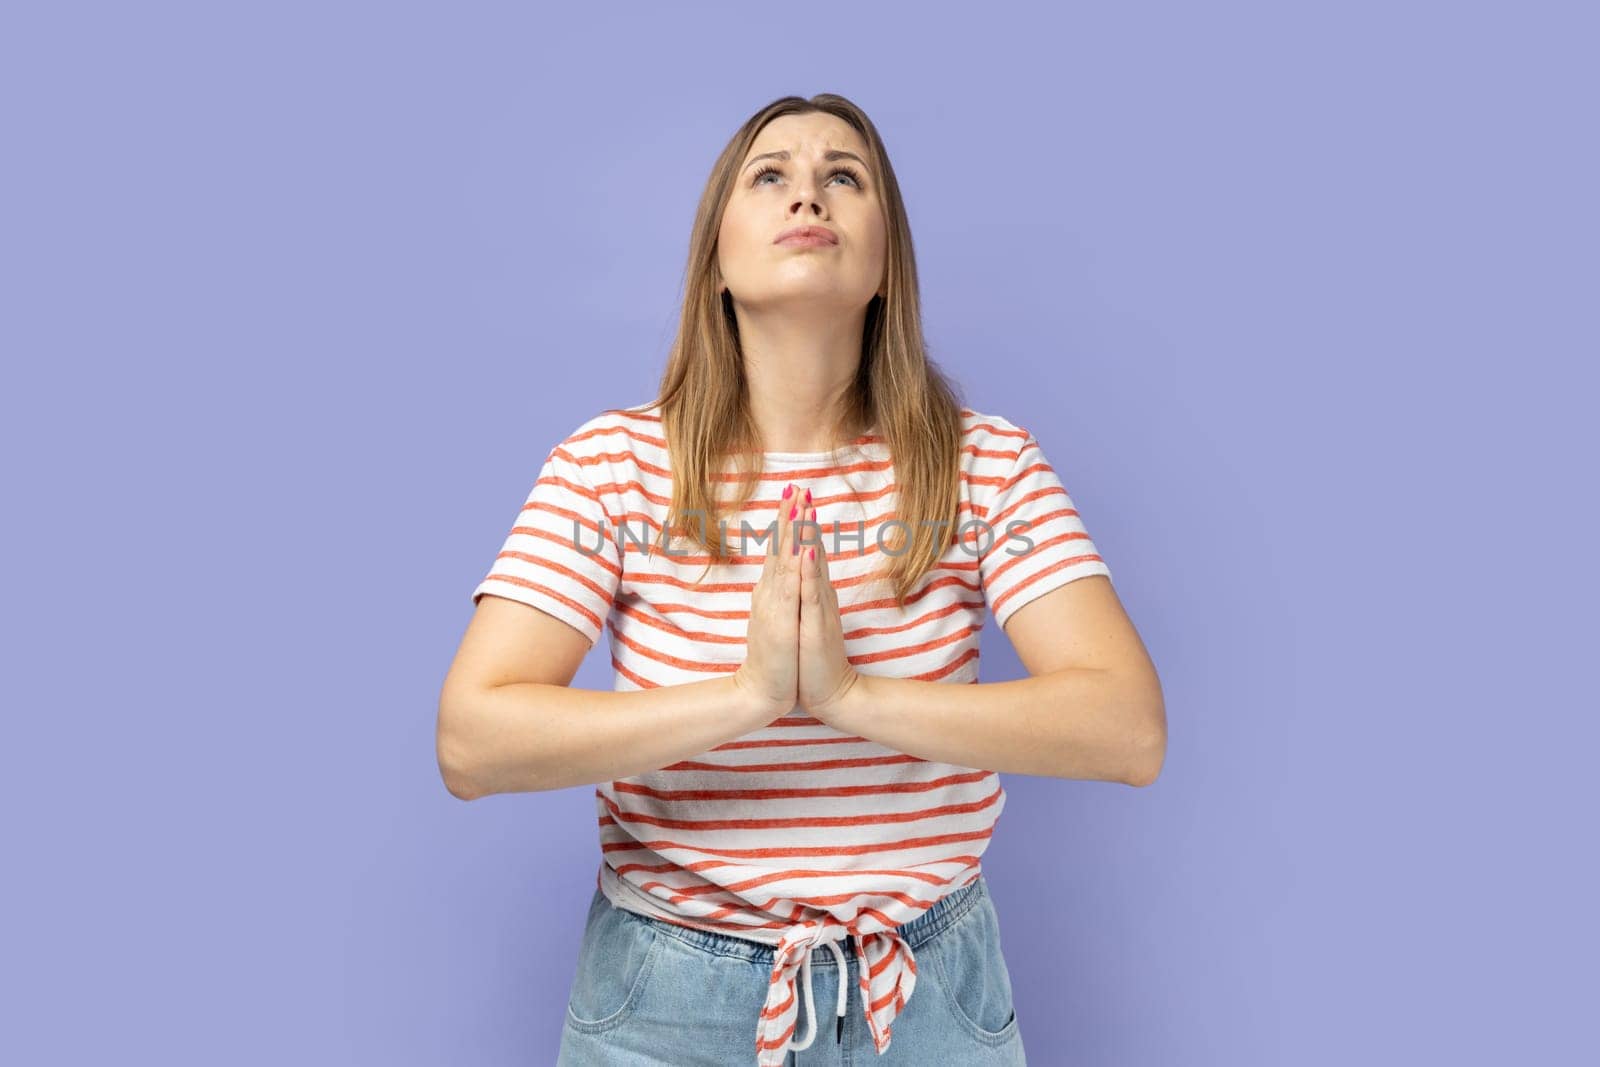 Portrait of attractive blond woman wearing striped T-shirt raising hands in prayer, looking up with hopeful pleading eyes, praying. Indoor studio shot isolated on purple background.